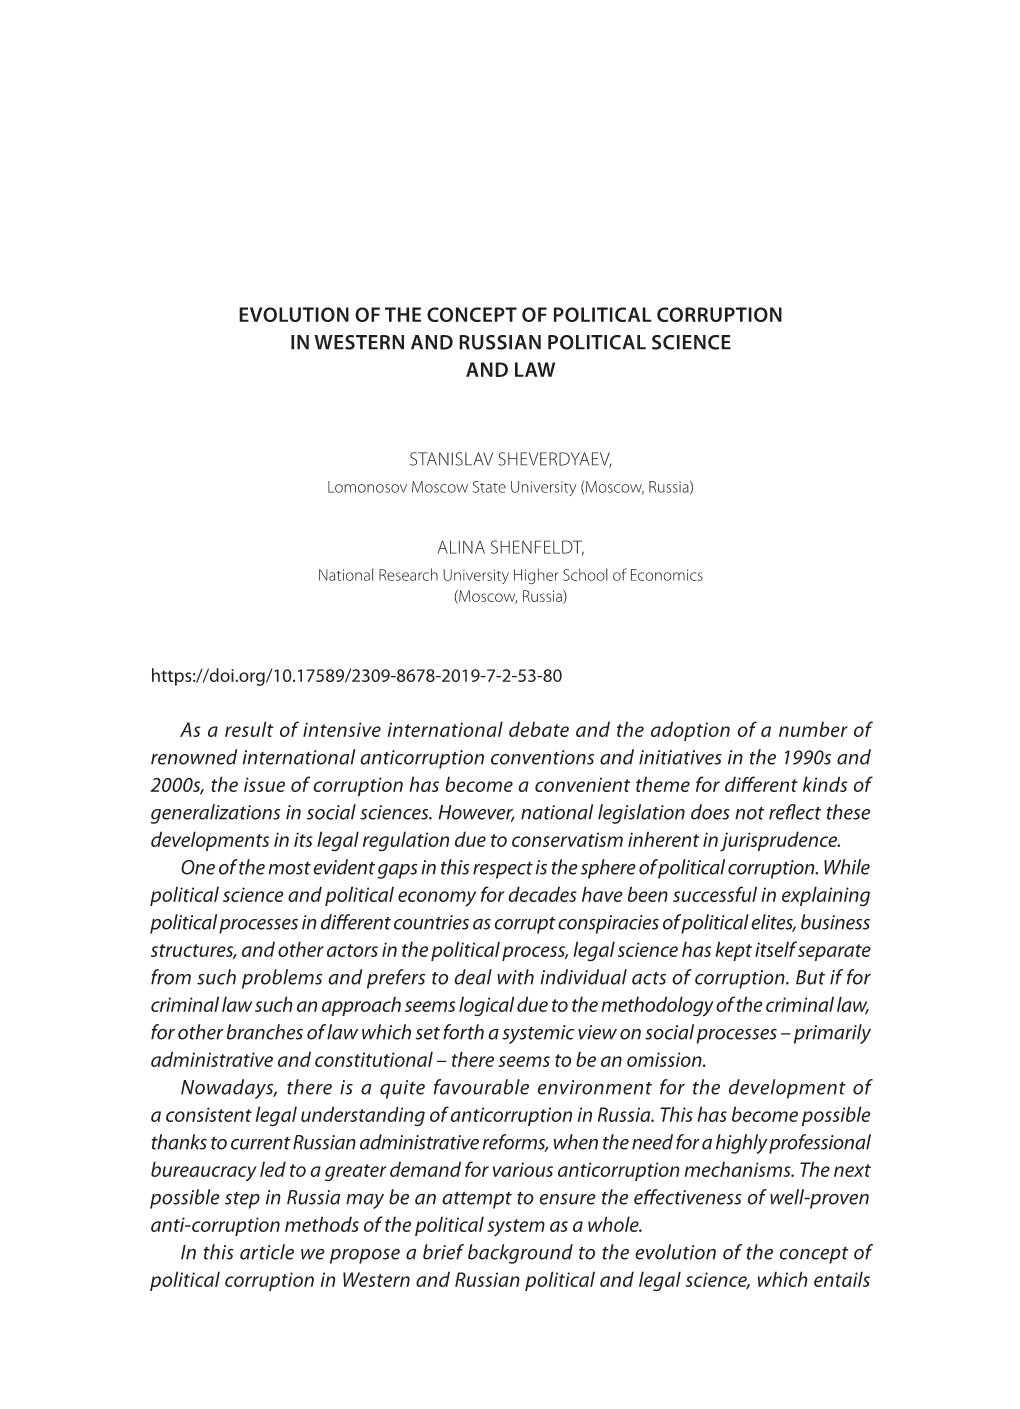 Evolution of the Concept of Political Corruption in Western and Russian Political Science and Law